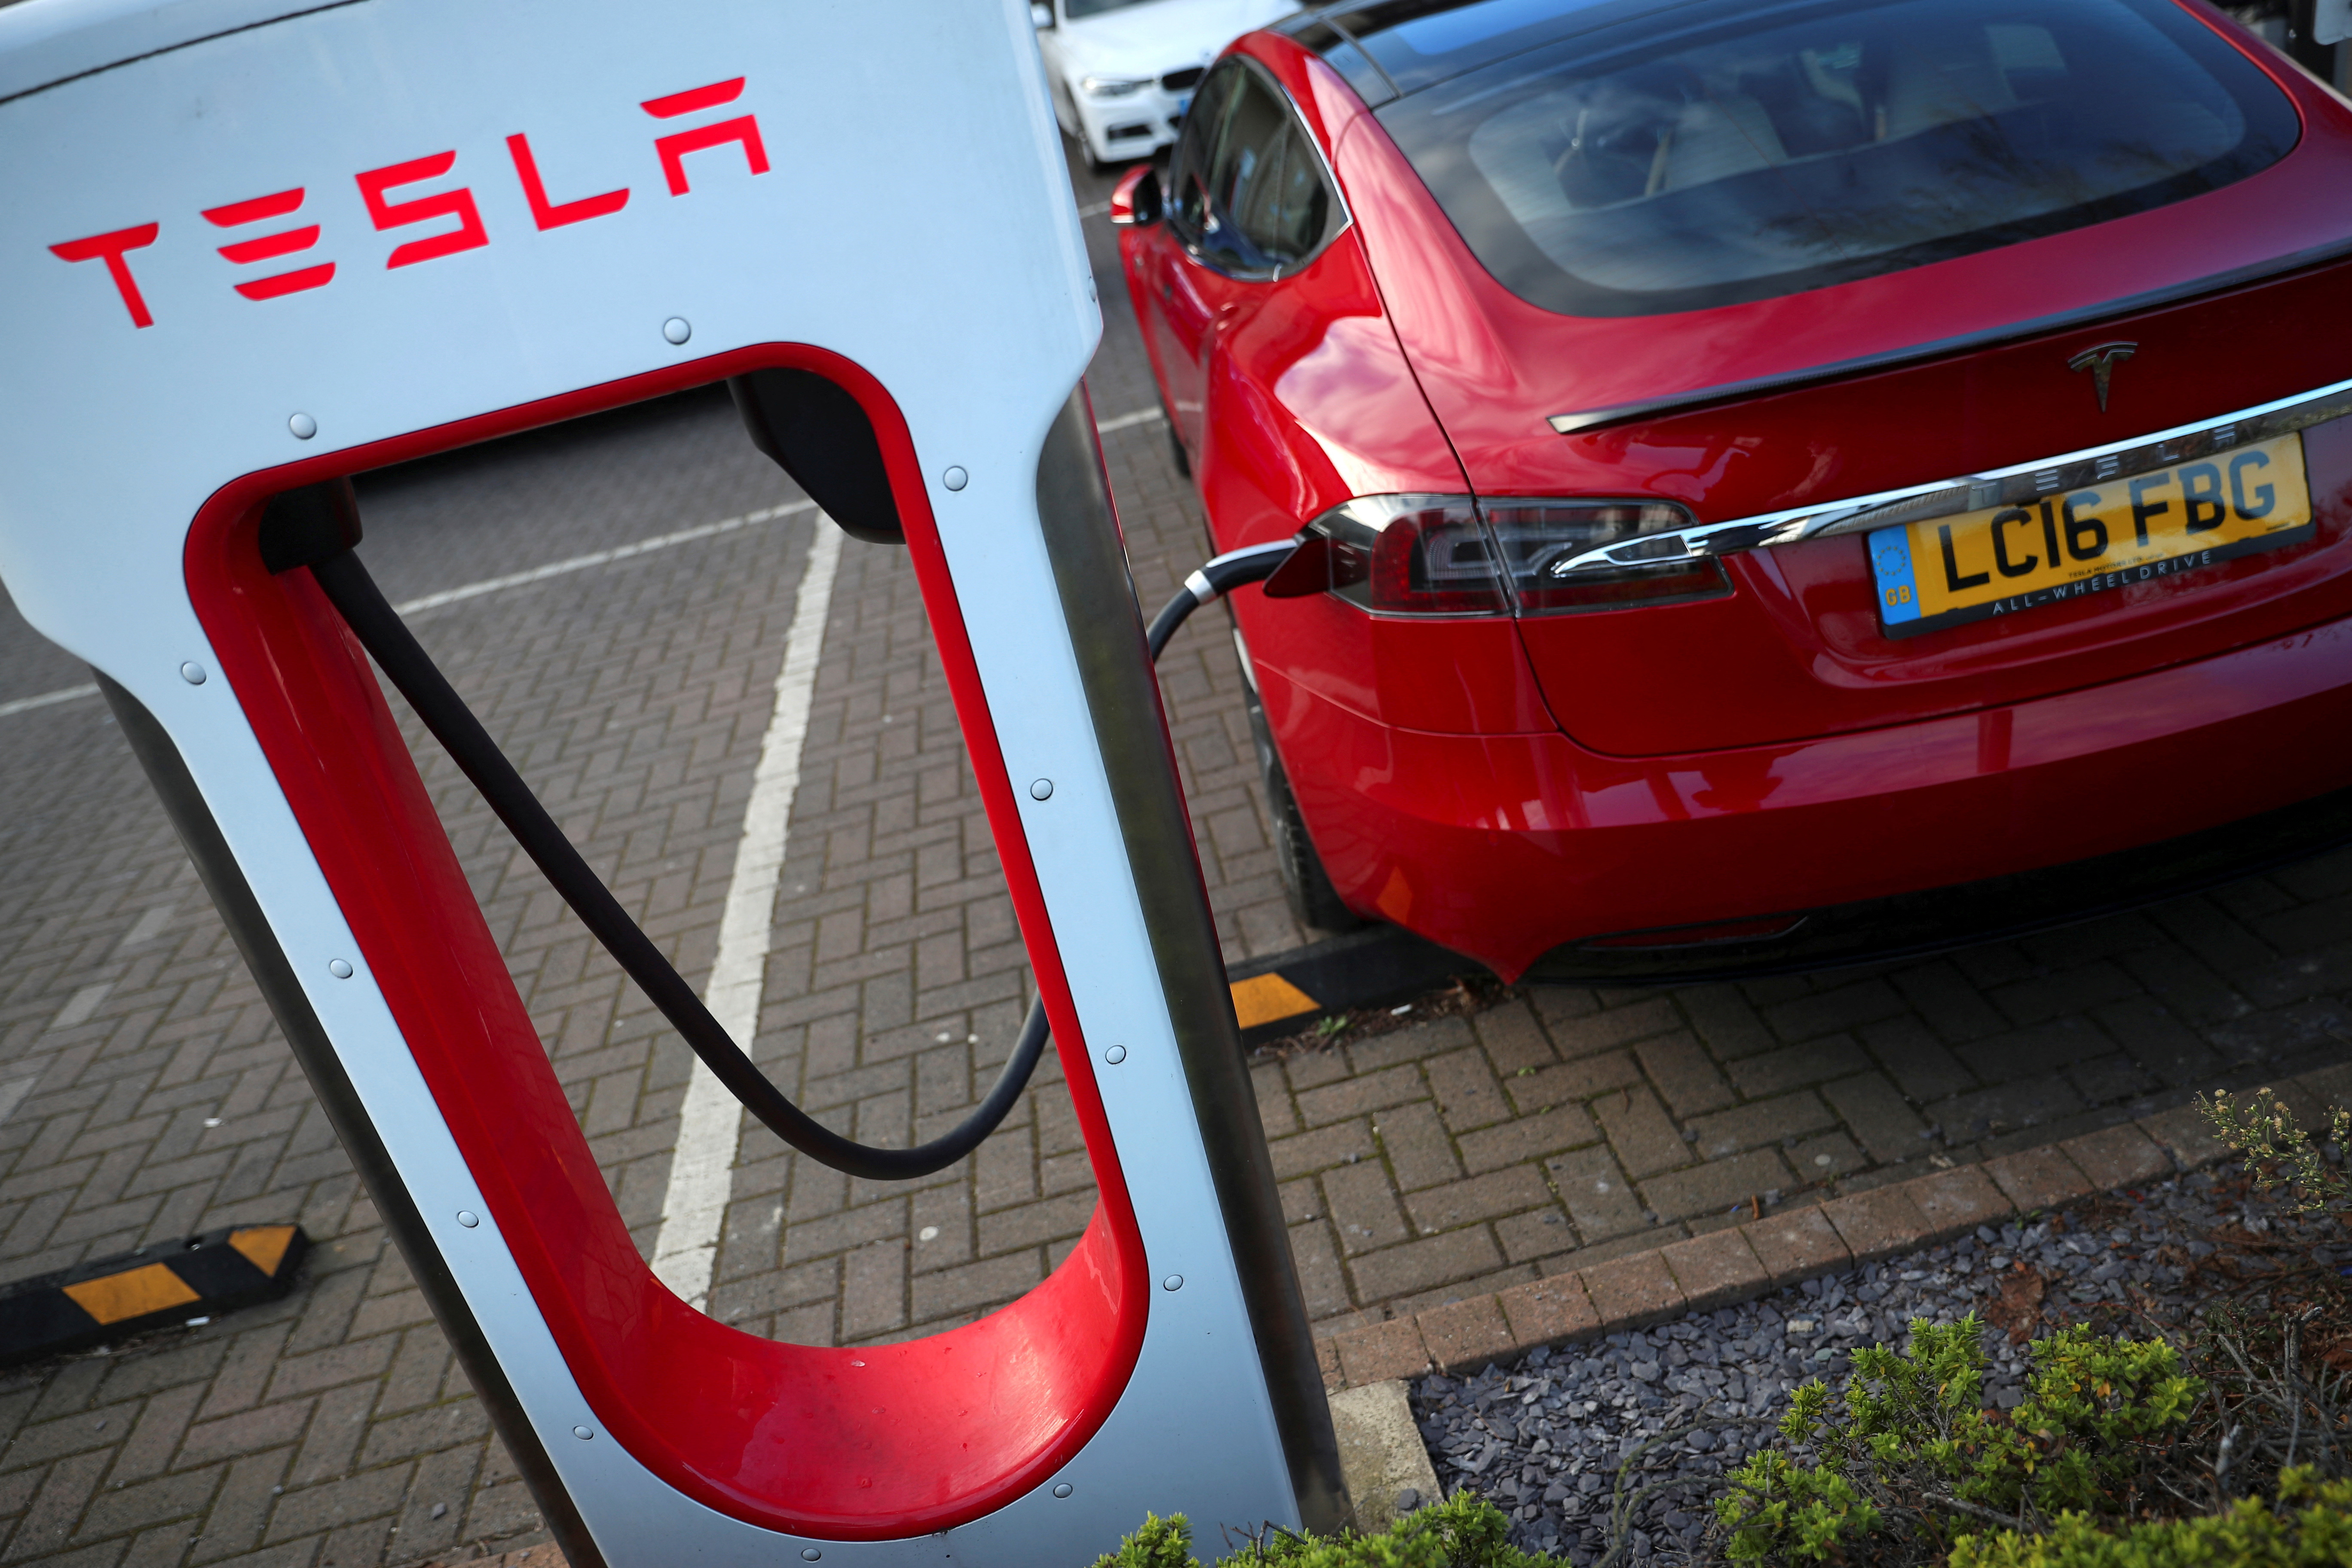 A Tesla car is charged at a Tesla dealership in West Drayton, just outside London